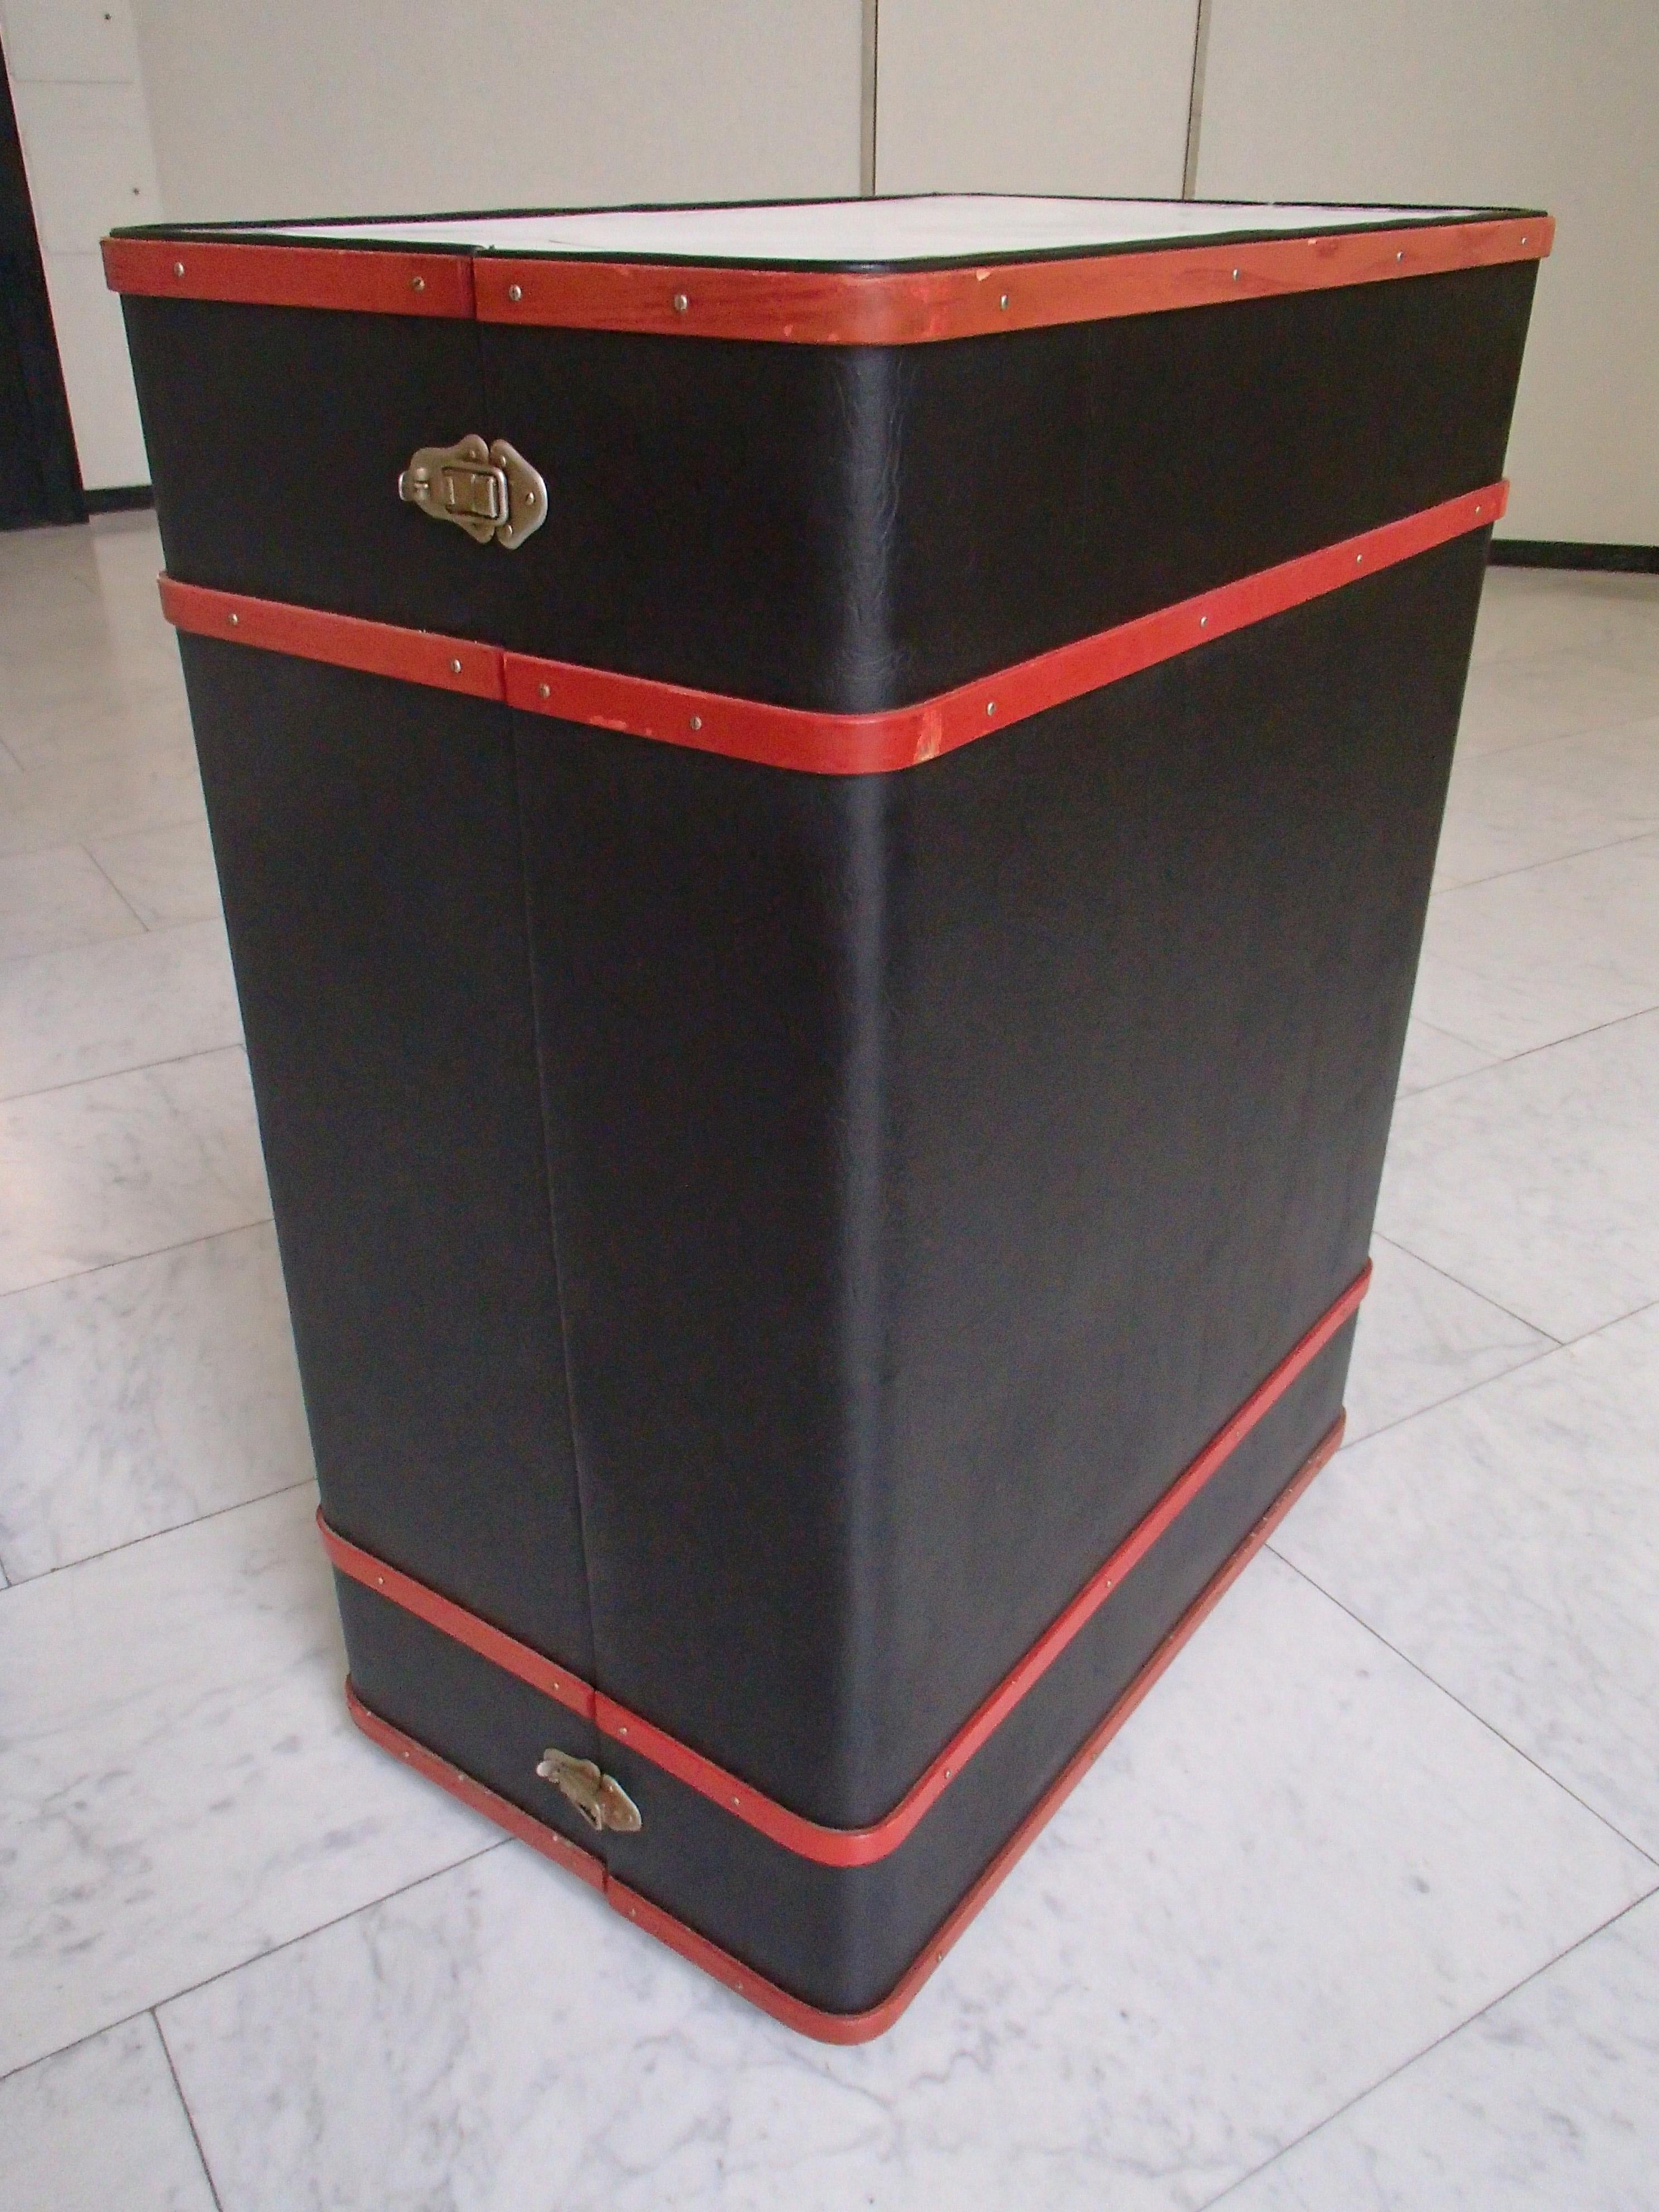 Modern trunk bar black and red with sink inside on wheels.